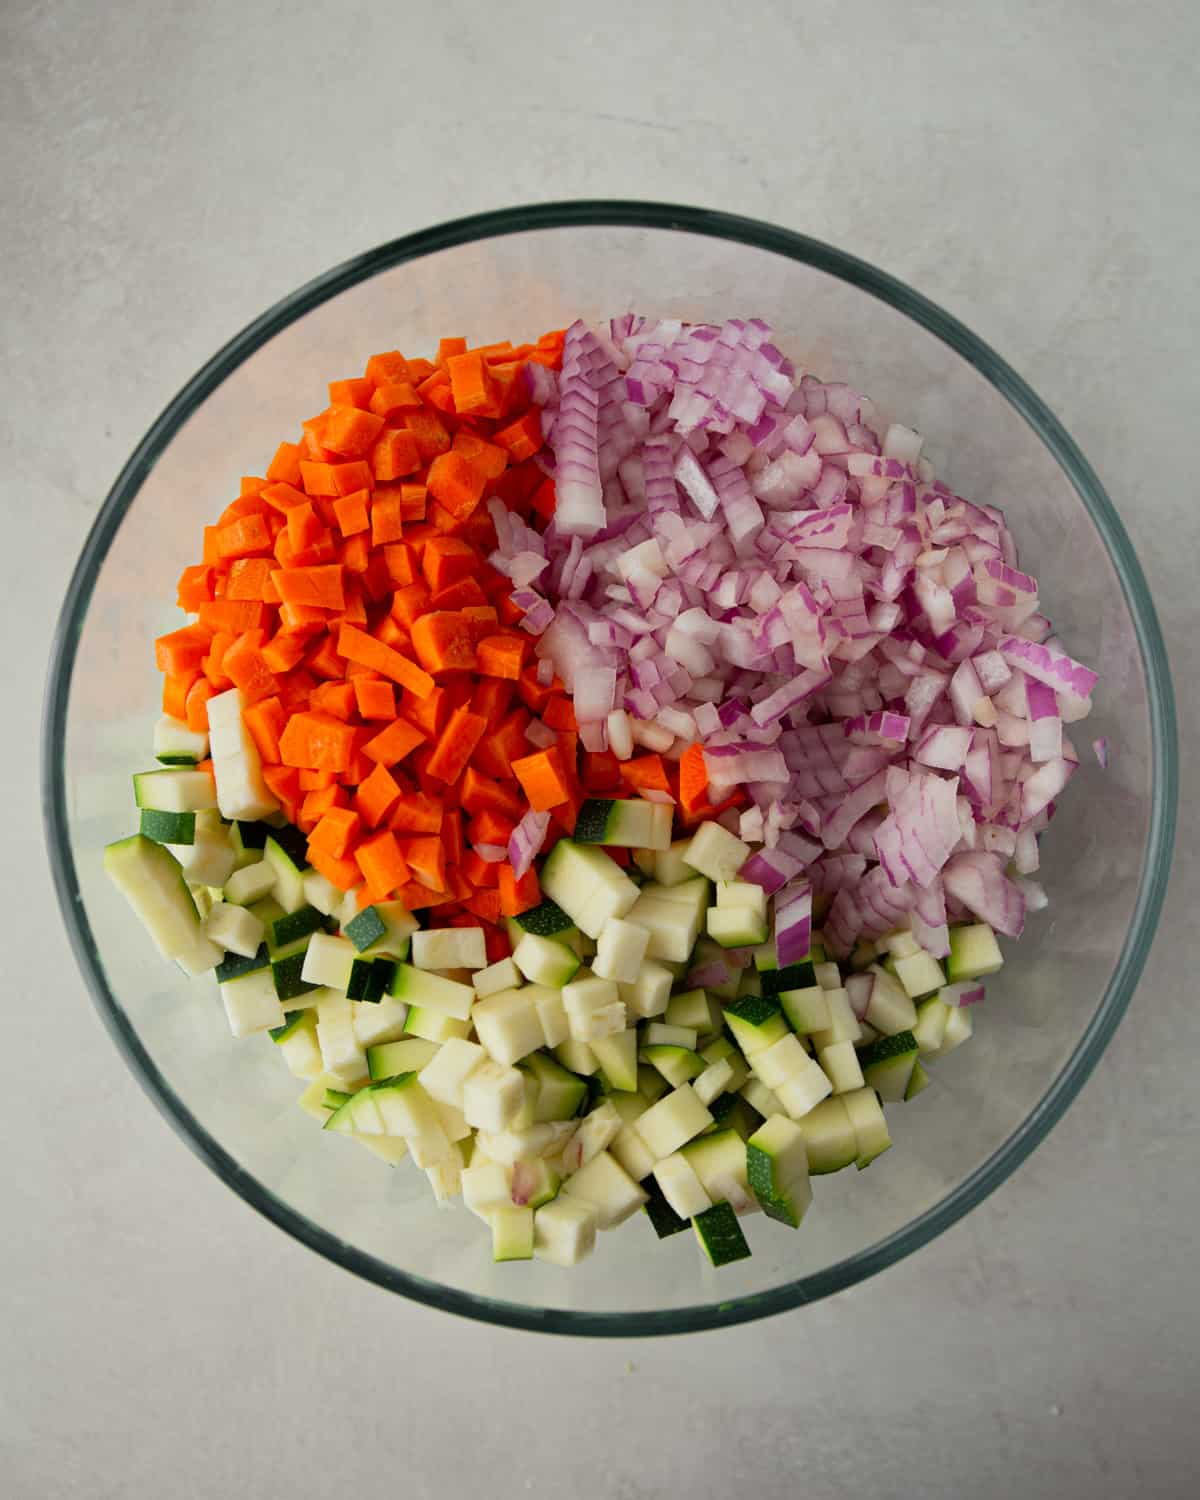 diced vegetables in a clear glass bowl